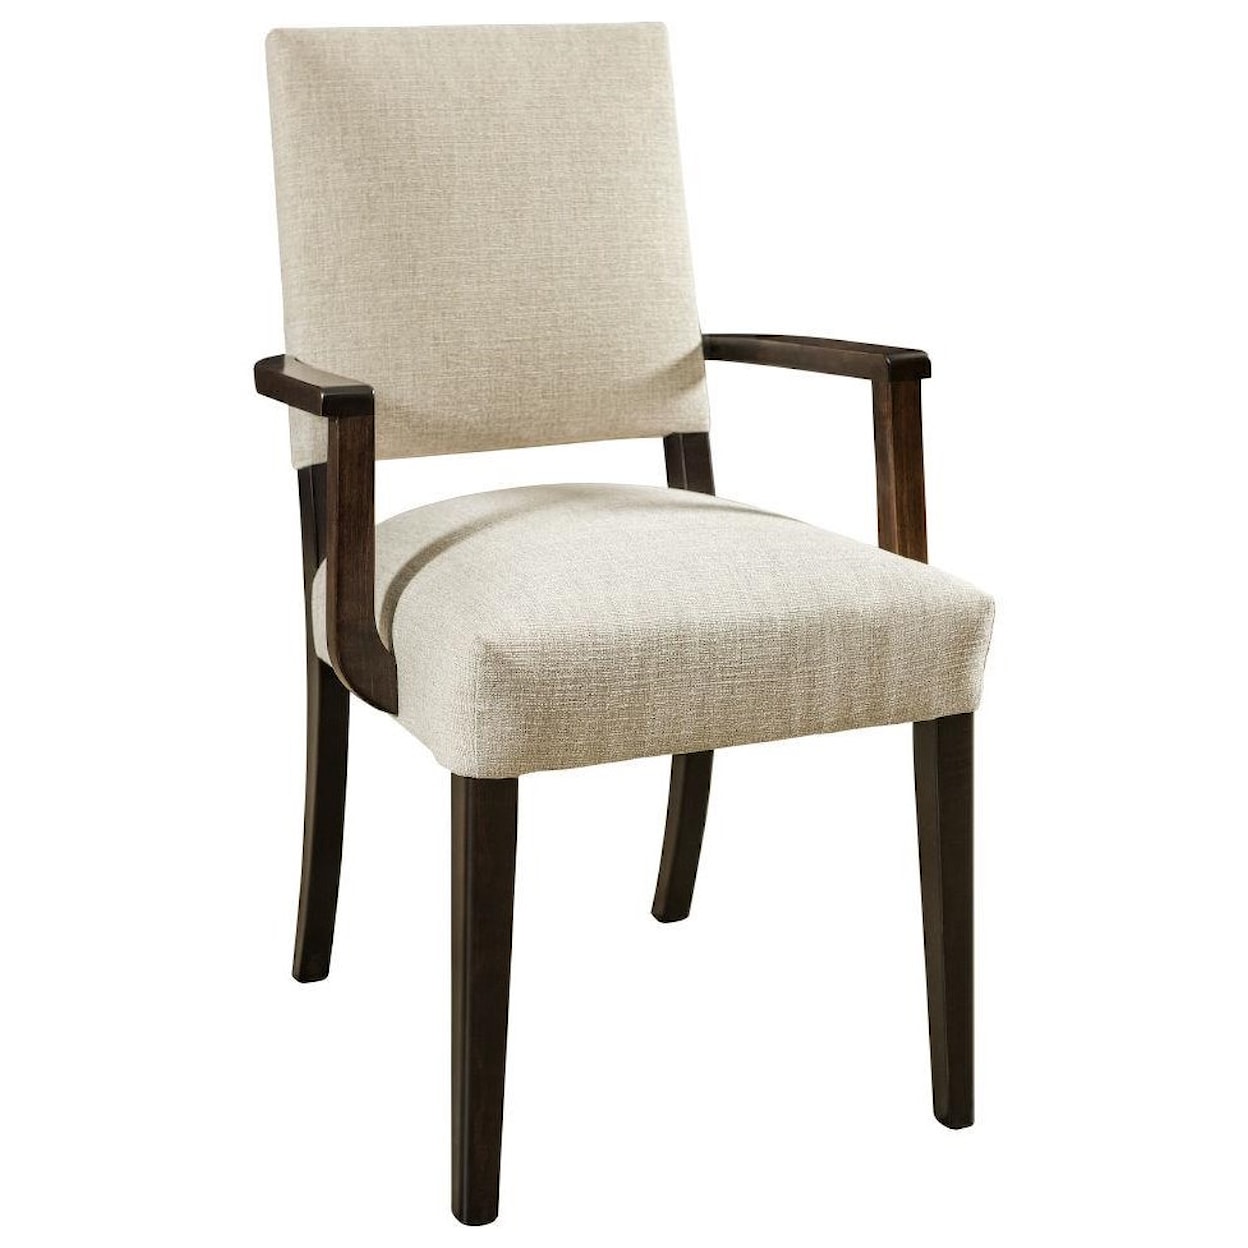 F&N Woodworking Canaan Arm Chair